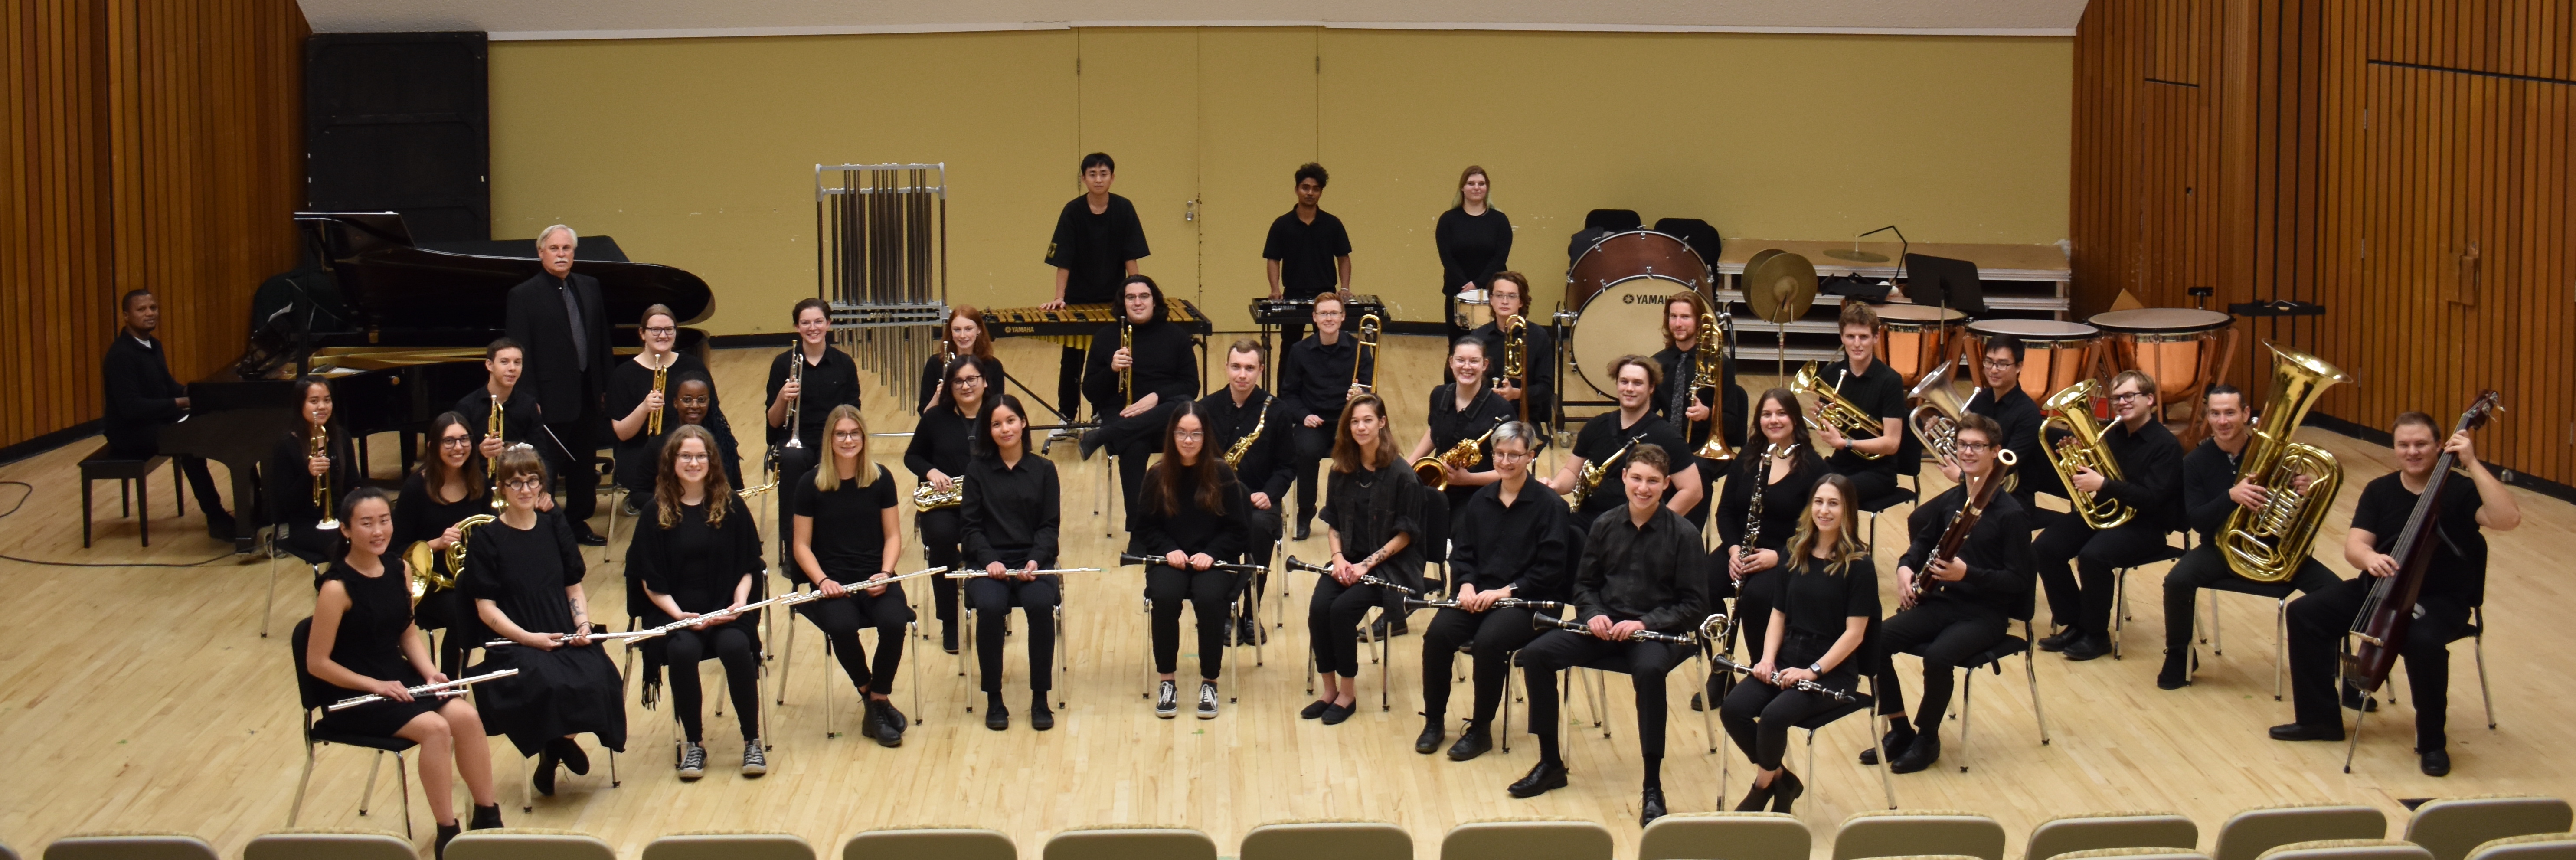 2019-20 U of S Concert Band Group Photo